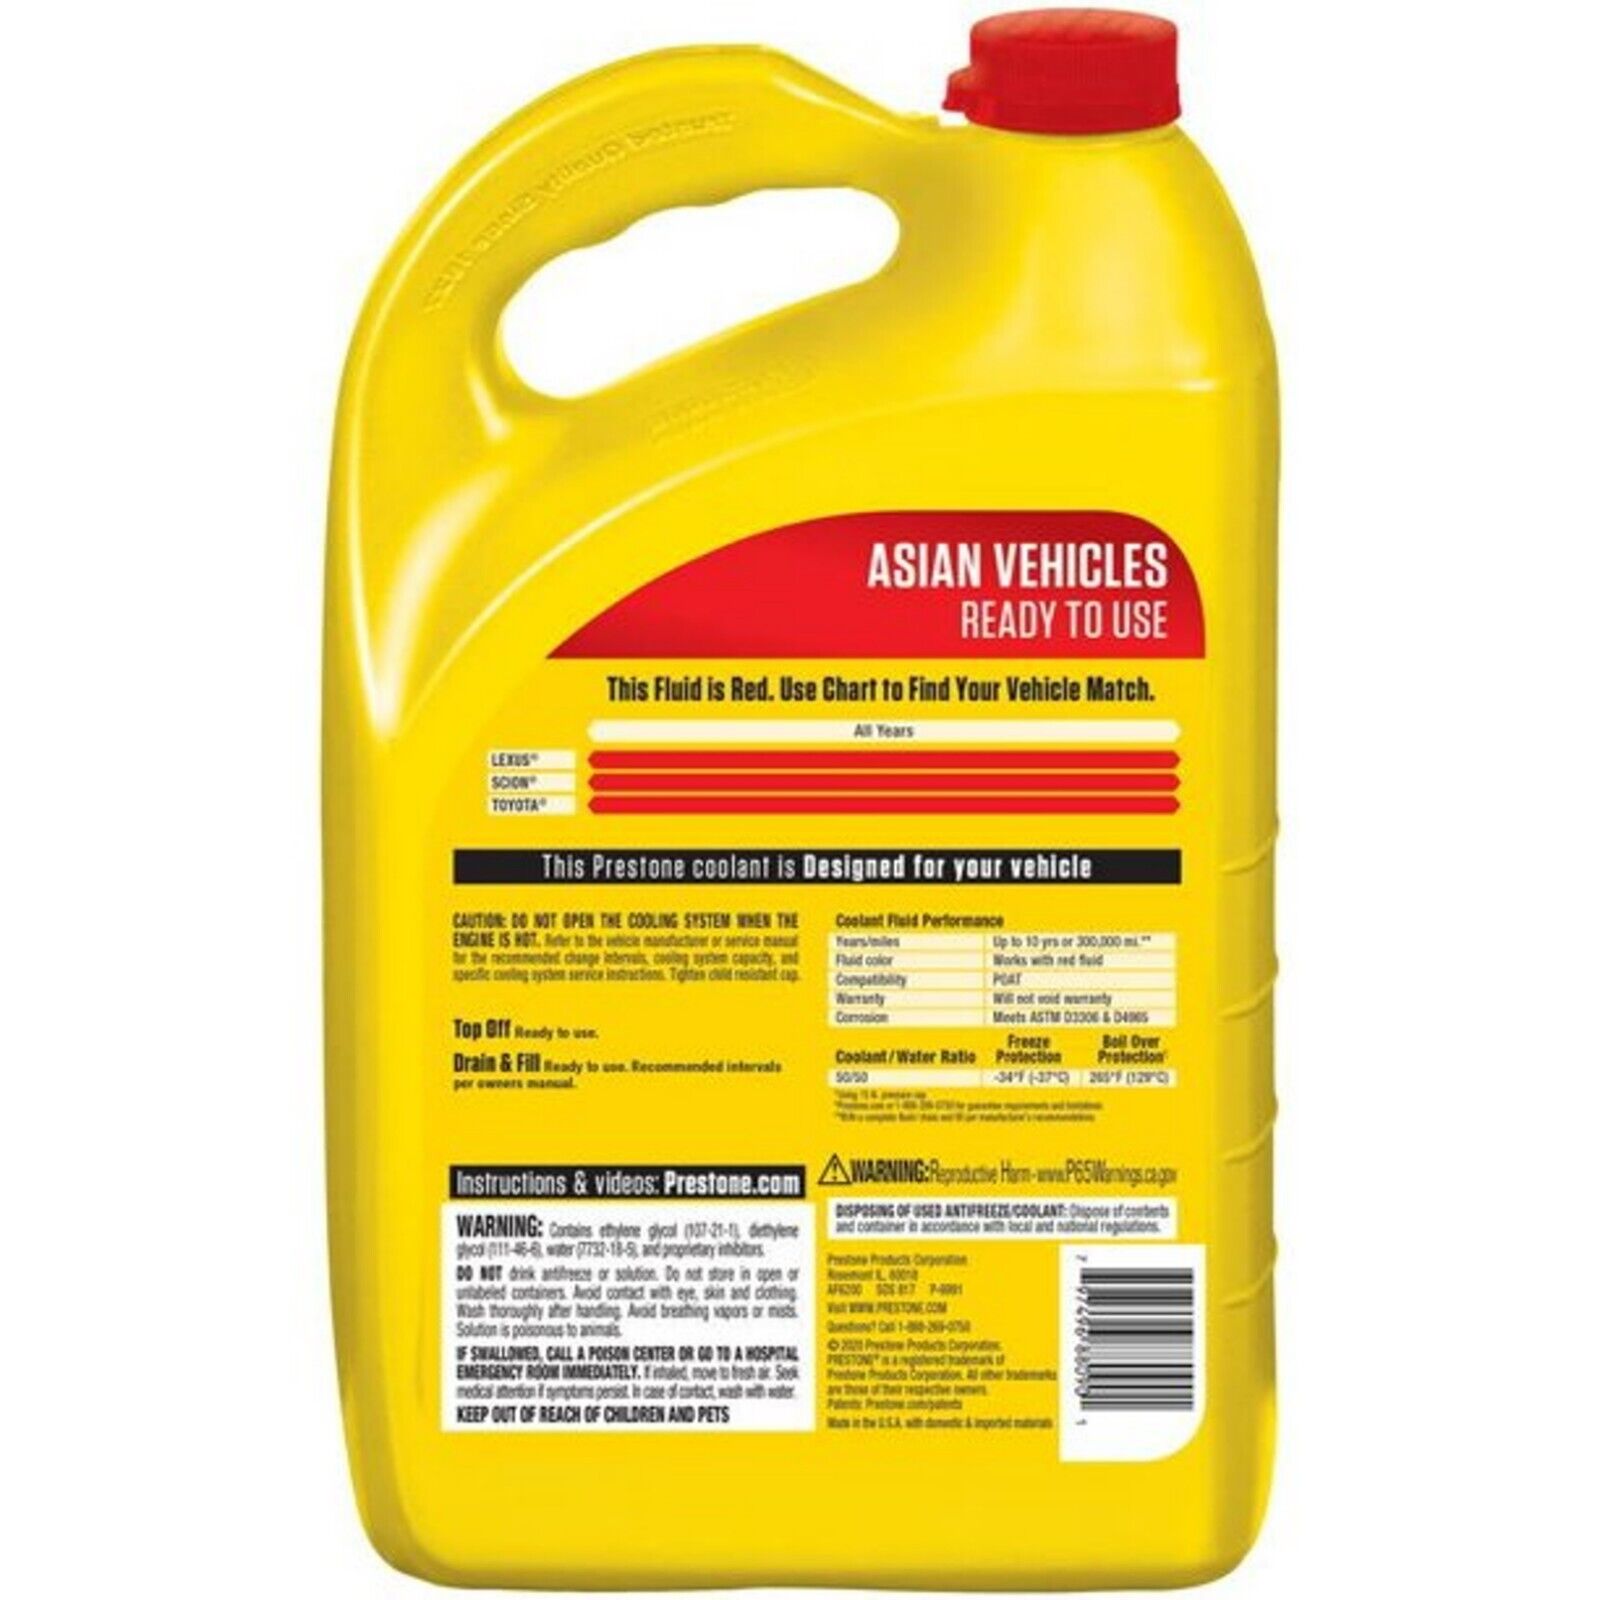 ANT AF6200 Prestone Asian Antifreeze/Coolant Prediluted 50/50 (Red, 1 Gal)